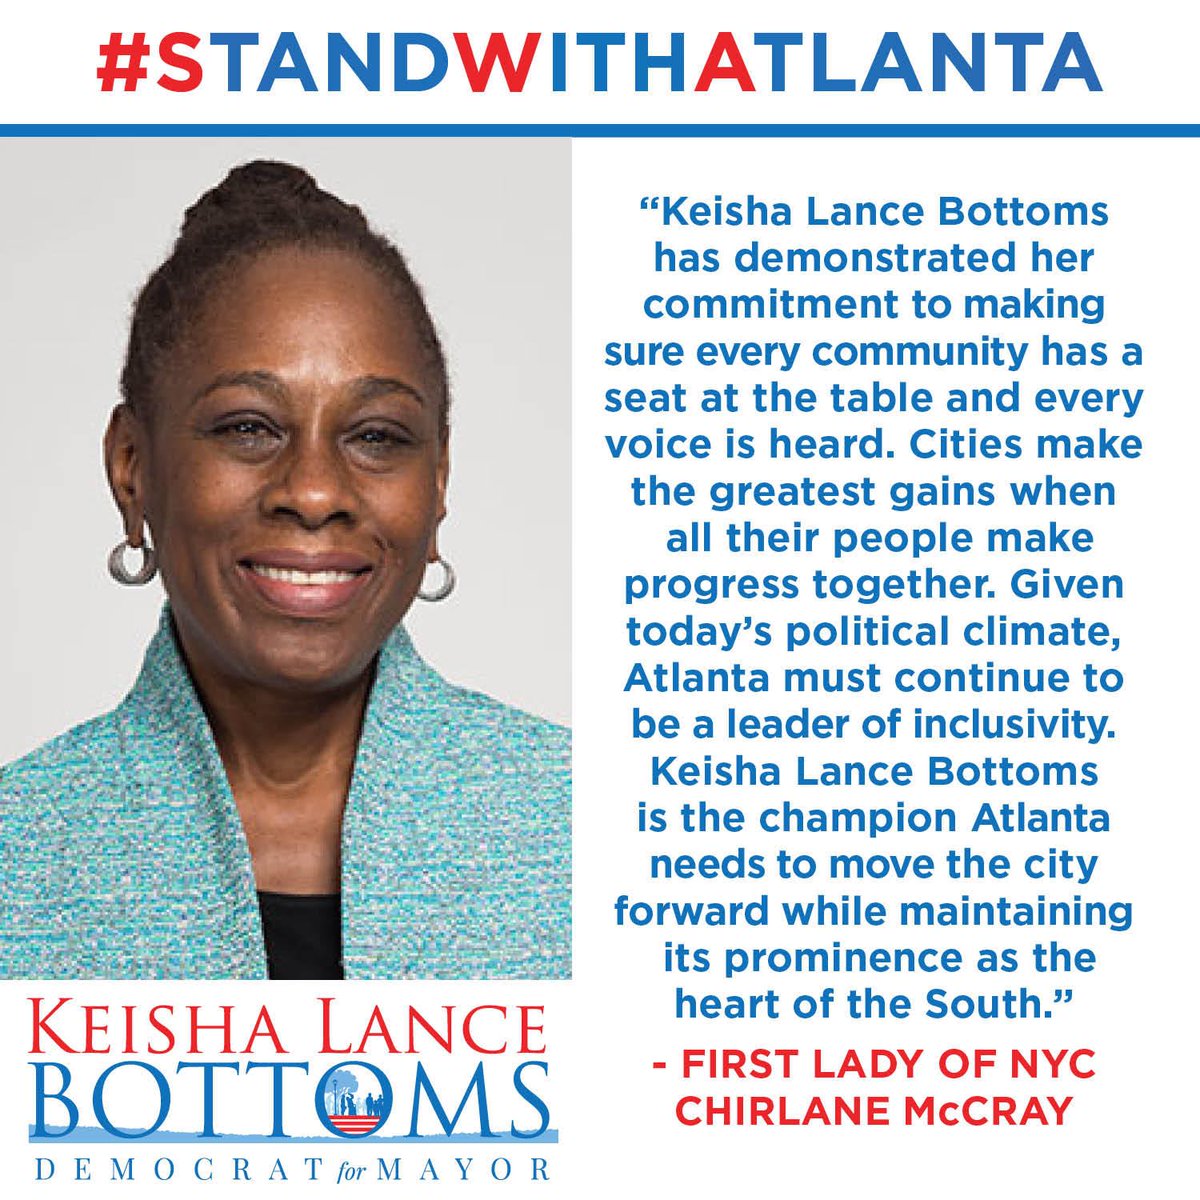 RT @Chirlane: .@KeishaBottoms is the champion Atlanta needs to move the city forward! https://t.co/z3rnTKmBcR